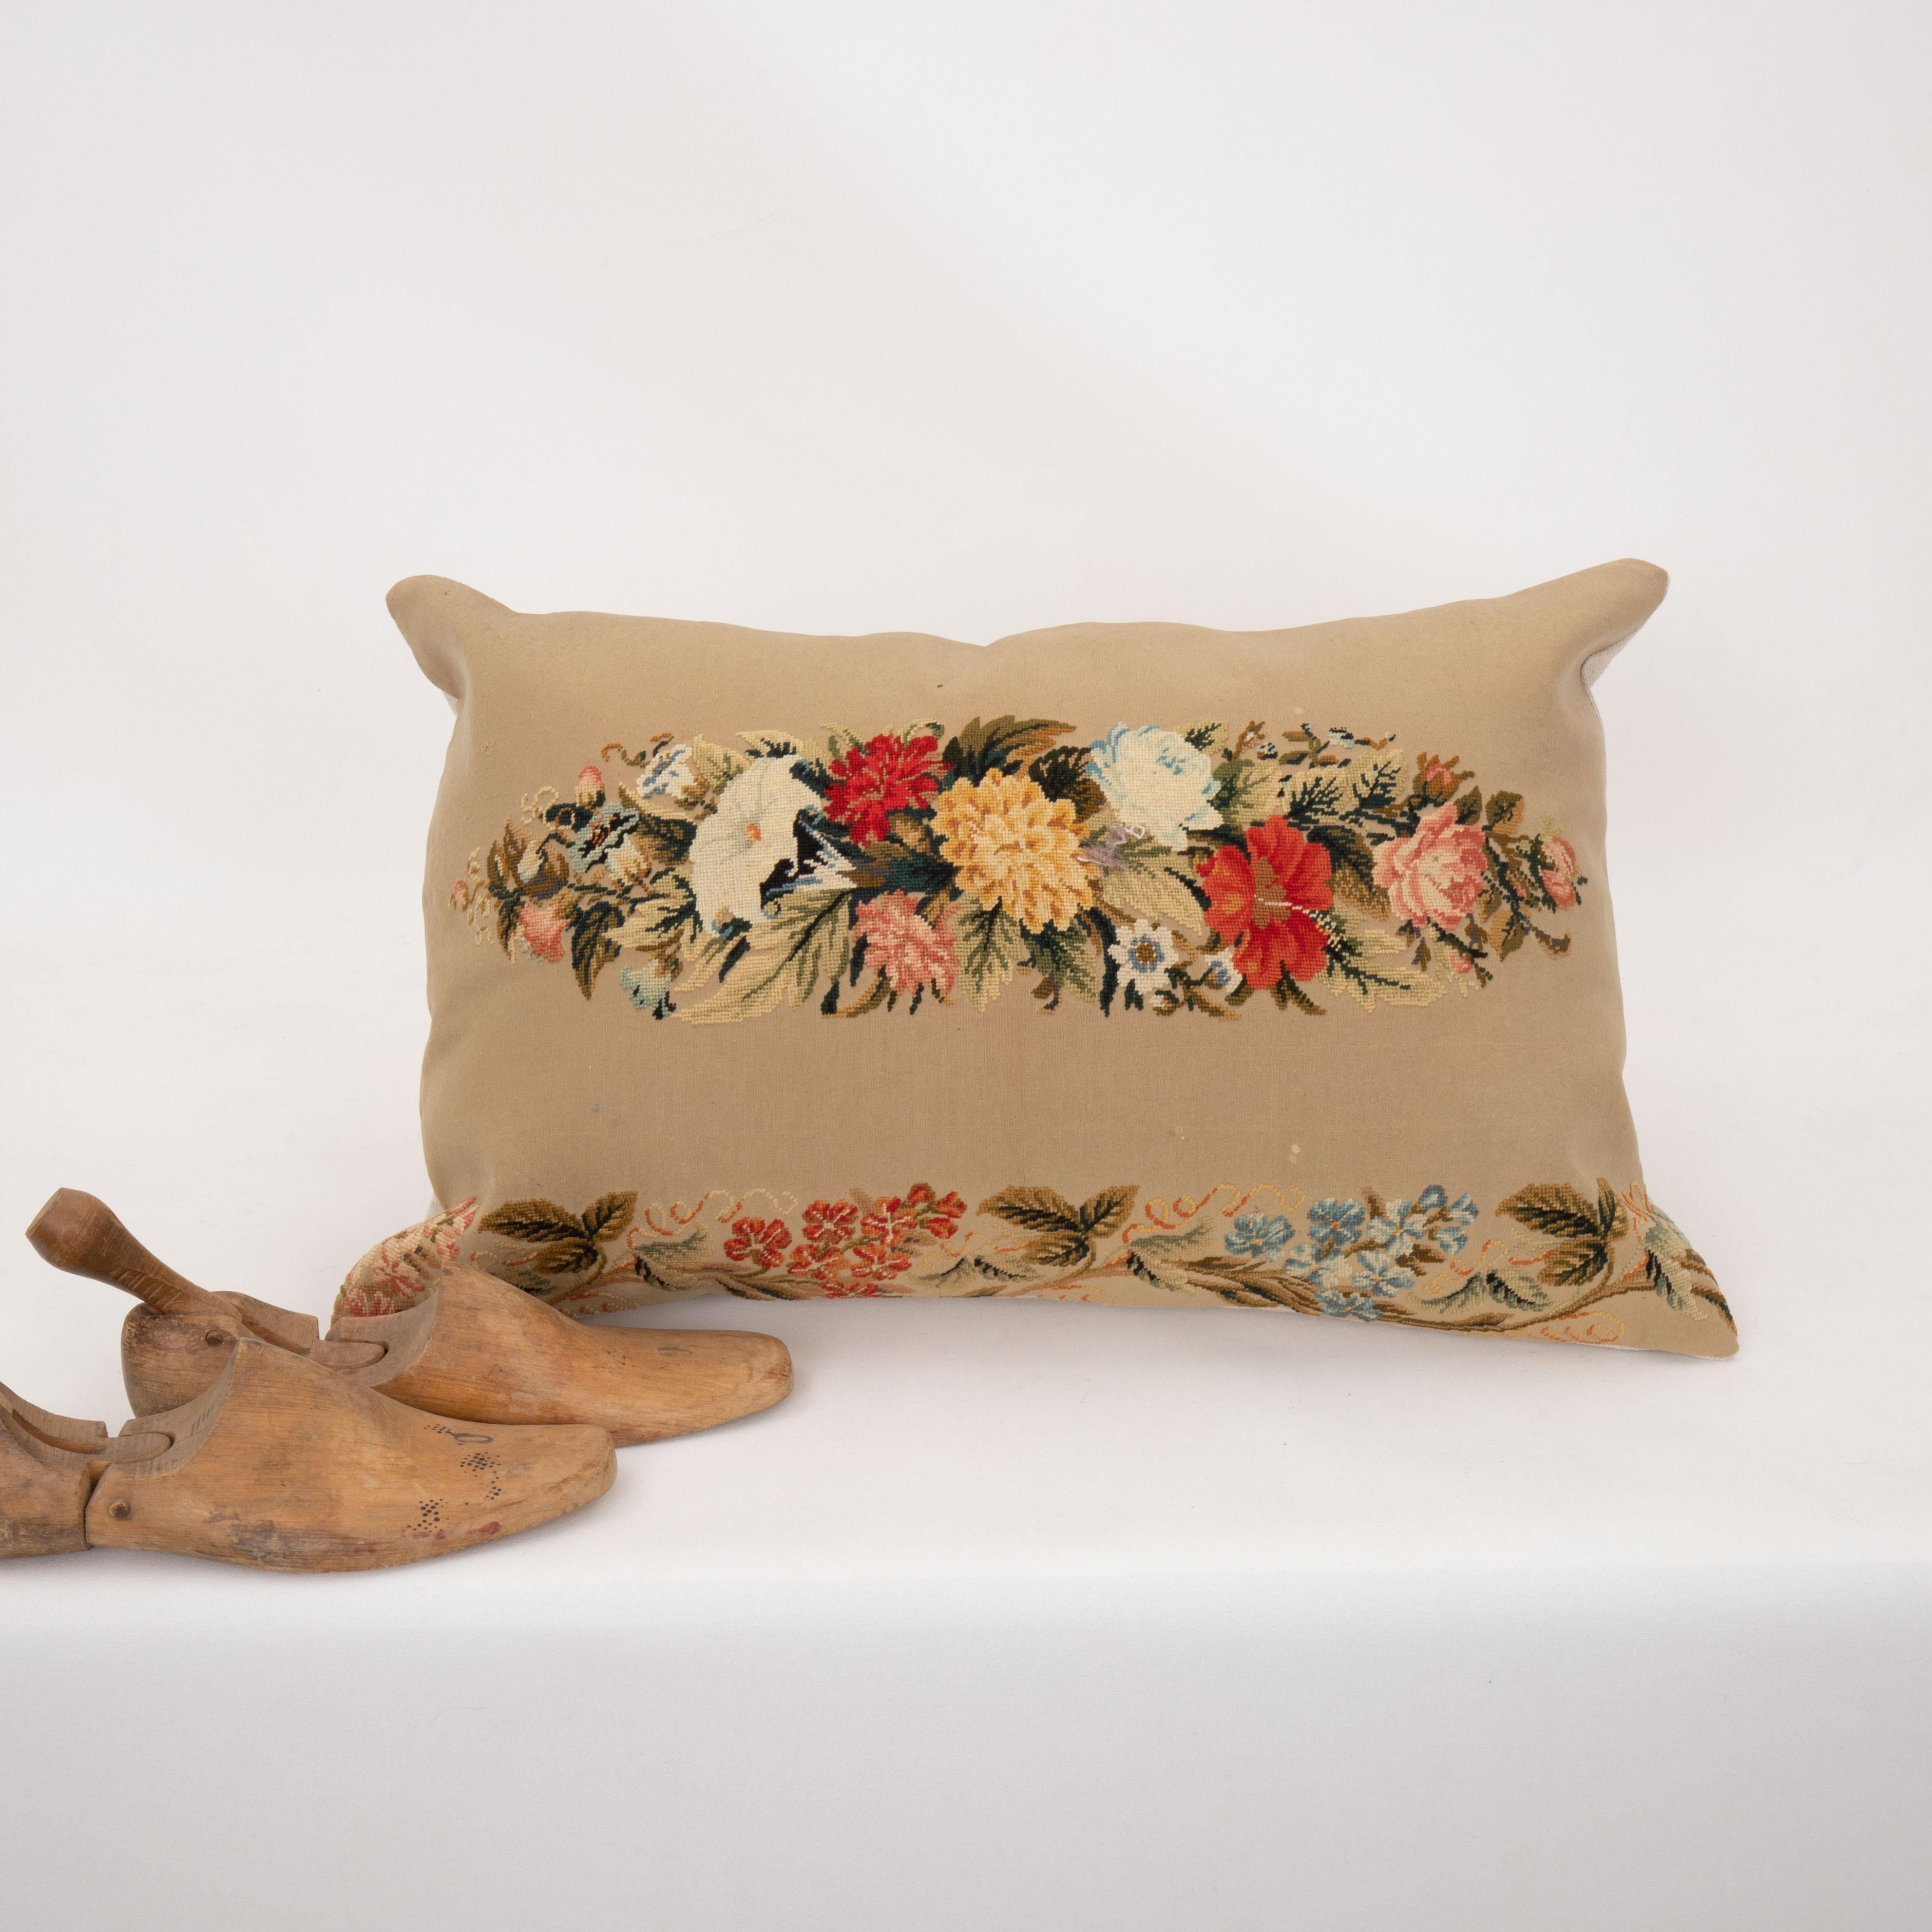 Embroidered Pillow Case Made from a European Embroidery, E 20th C. For Sale